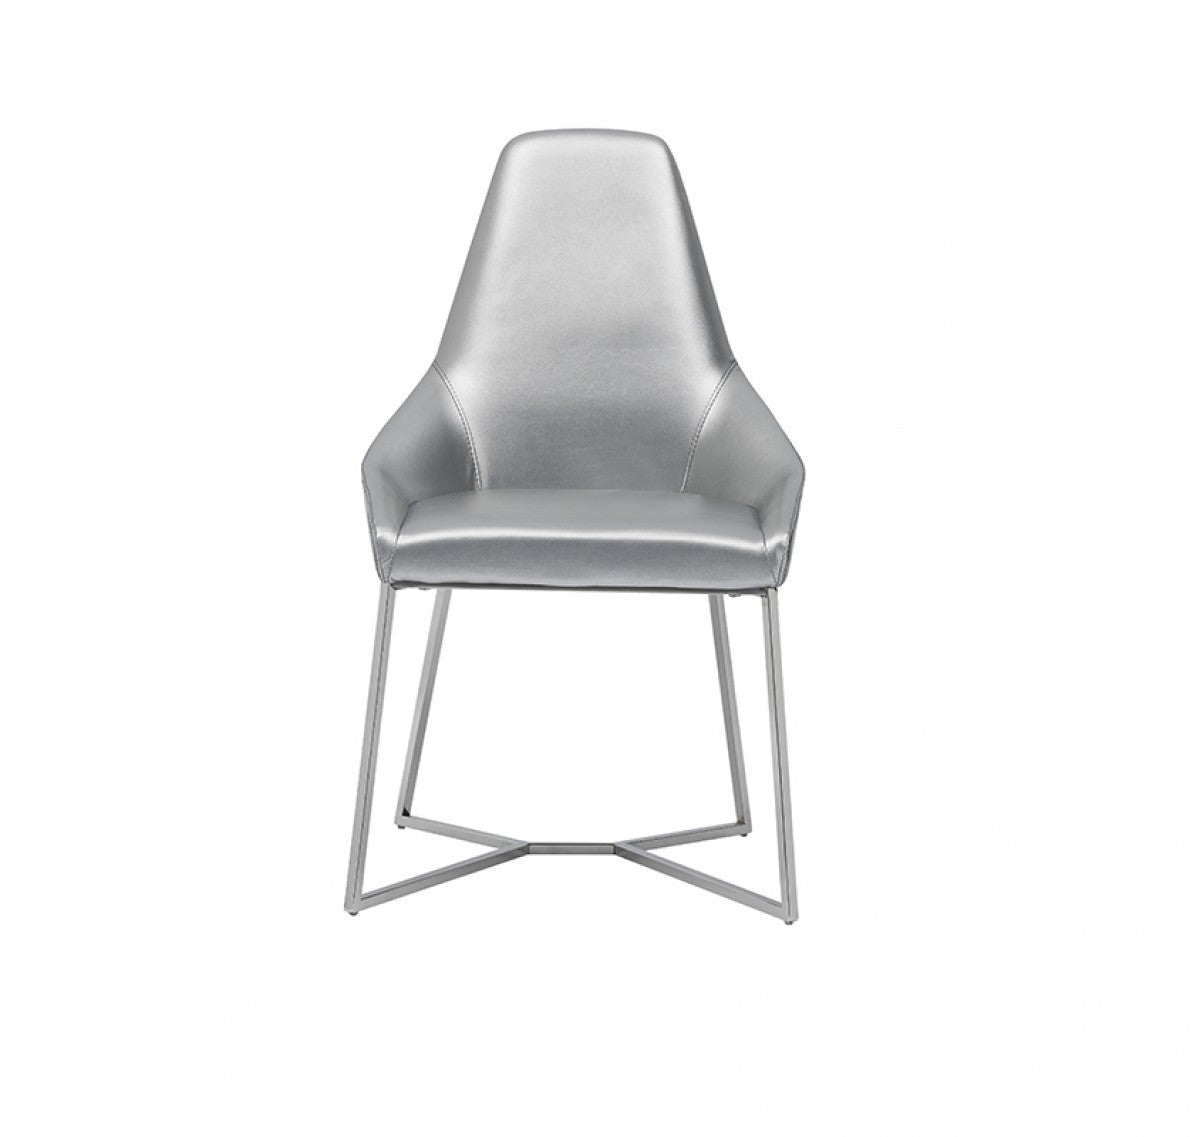 Modrest Sarah Modern Pearl Grey Leatherette Dining Chair (Set of 2) - Enova Luxe Home Store